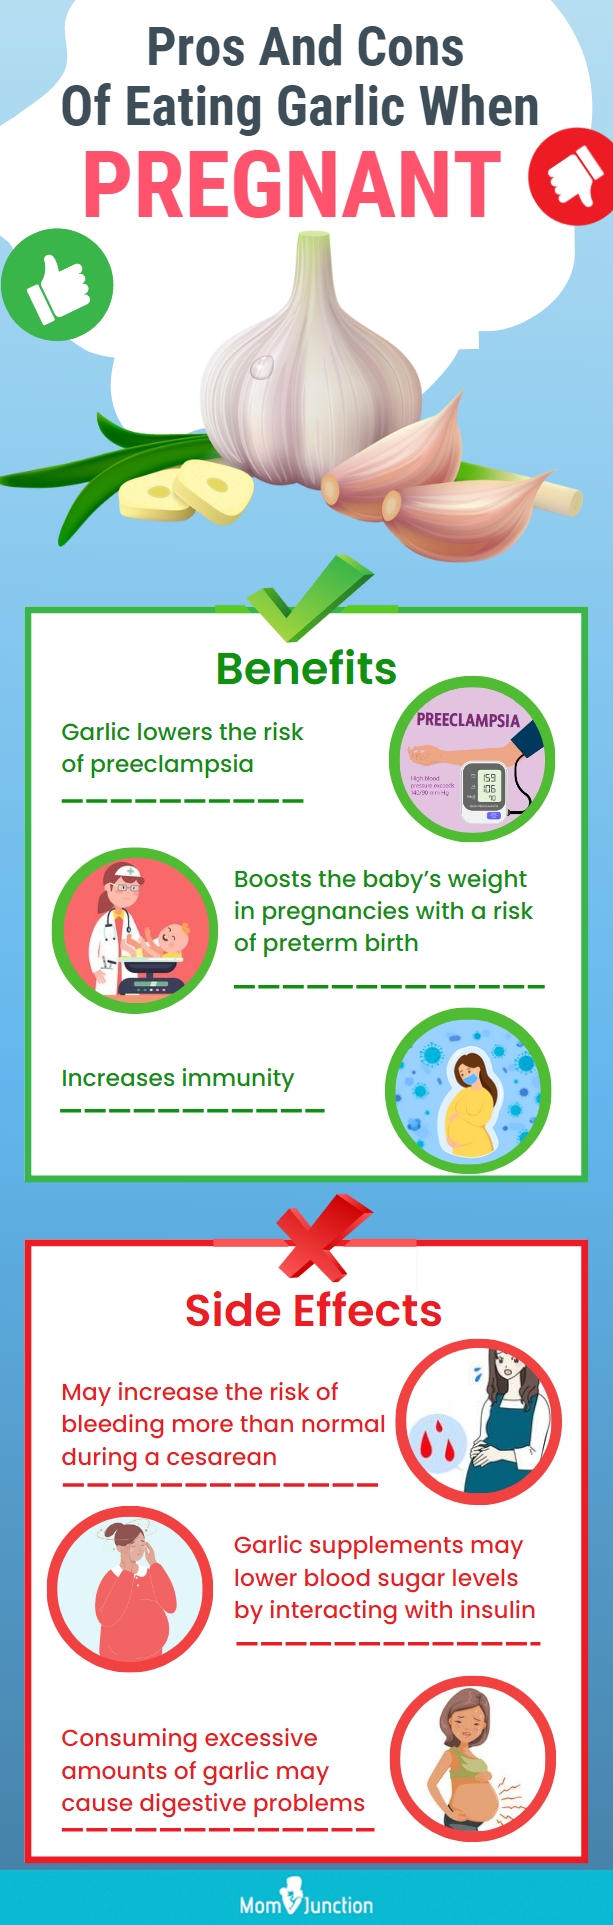 pros and cons of eating garlic when pregnant (infographic)